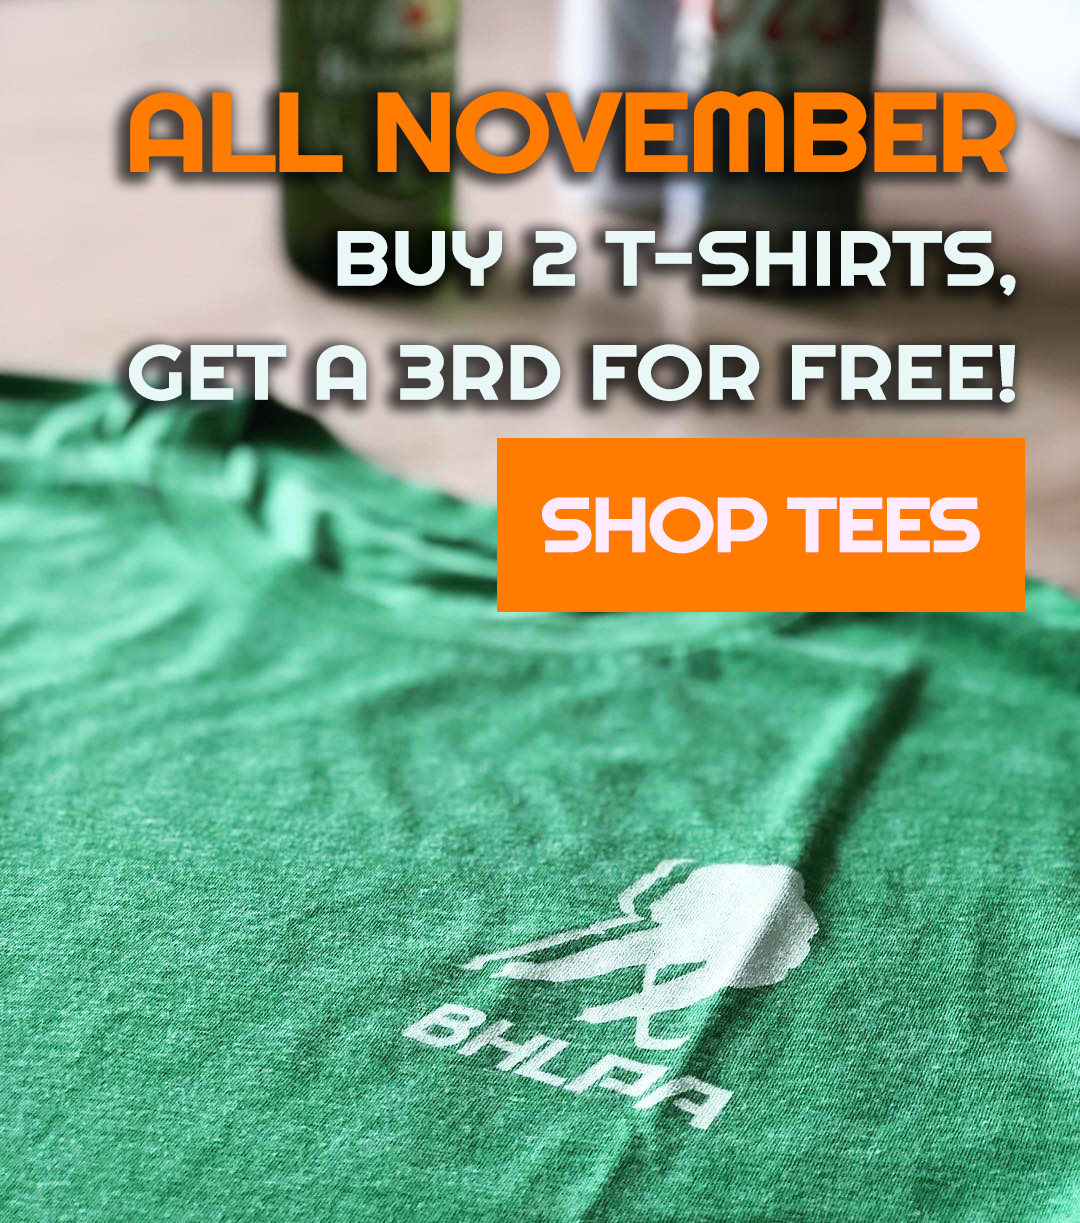 ALL NOVEMBER: Buy 2 t-shirts, Get a 3rd t-shirt for FREE!